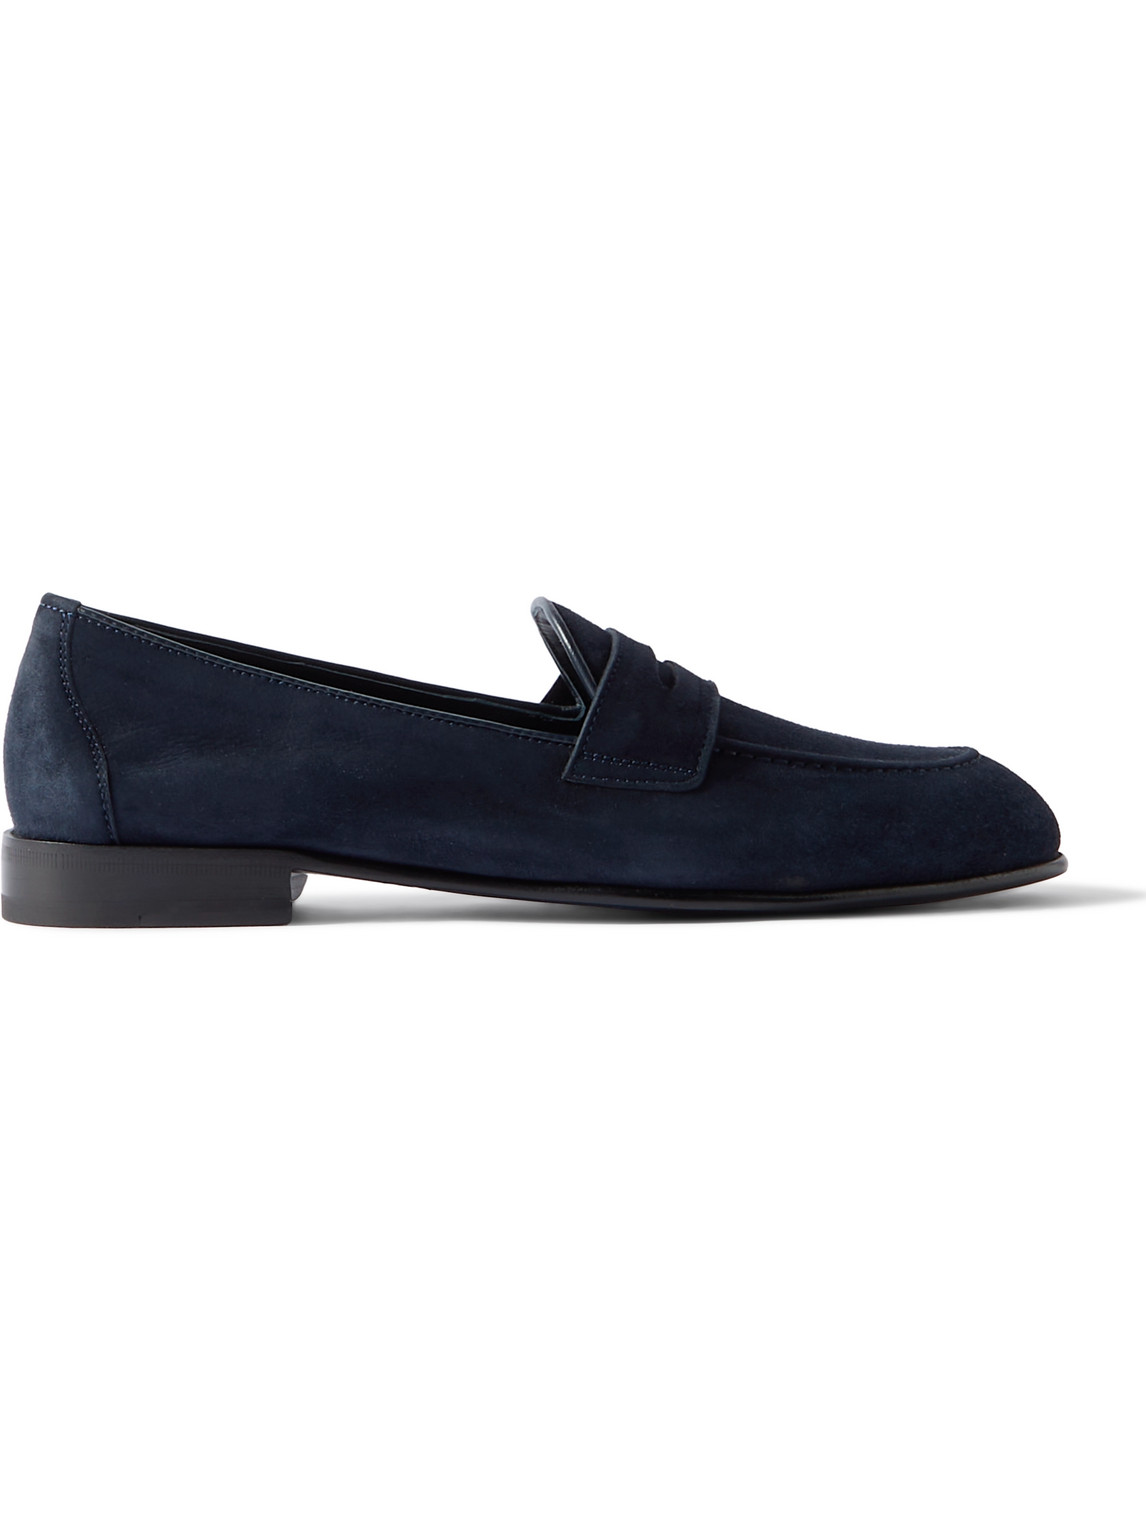 BRIONI SUEDE PENNY LOAFERS